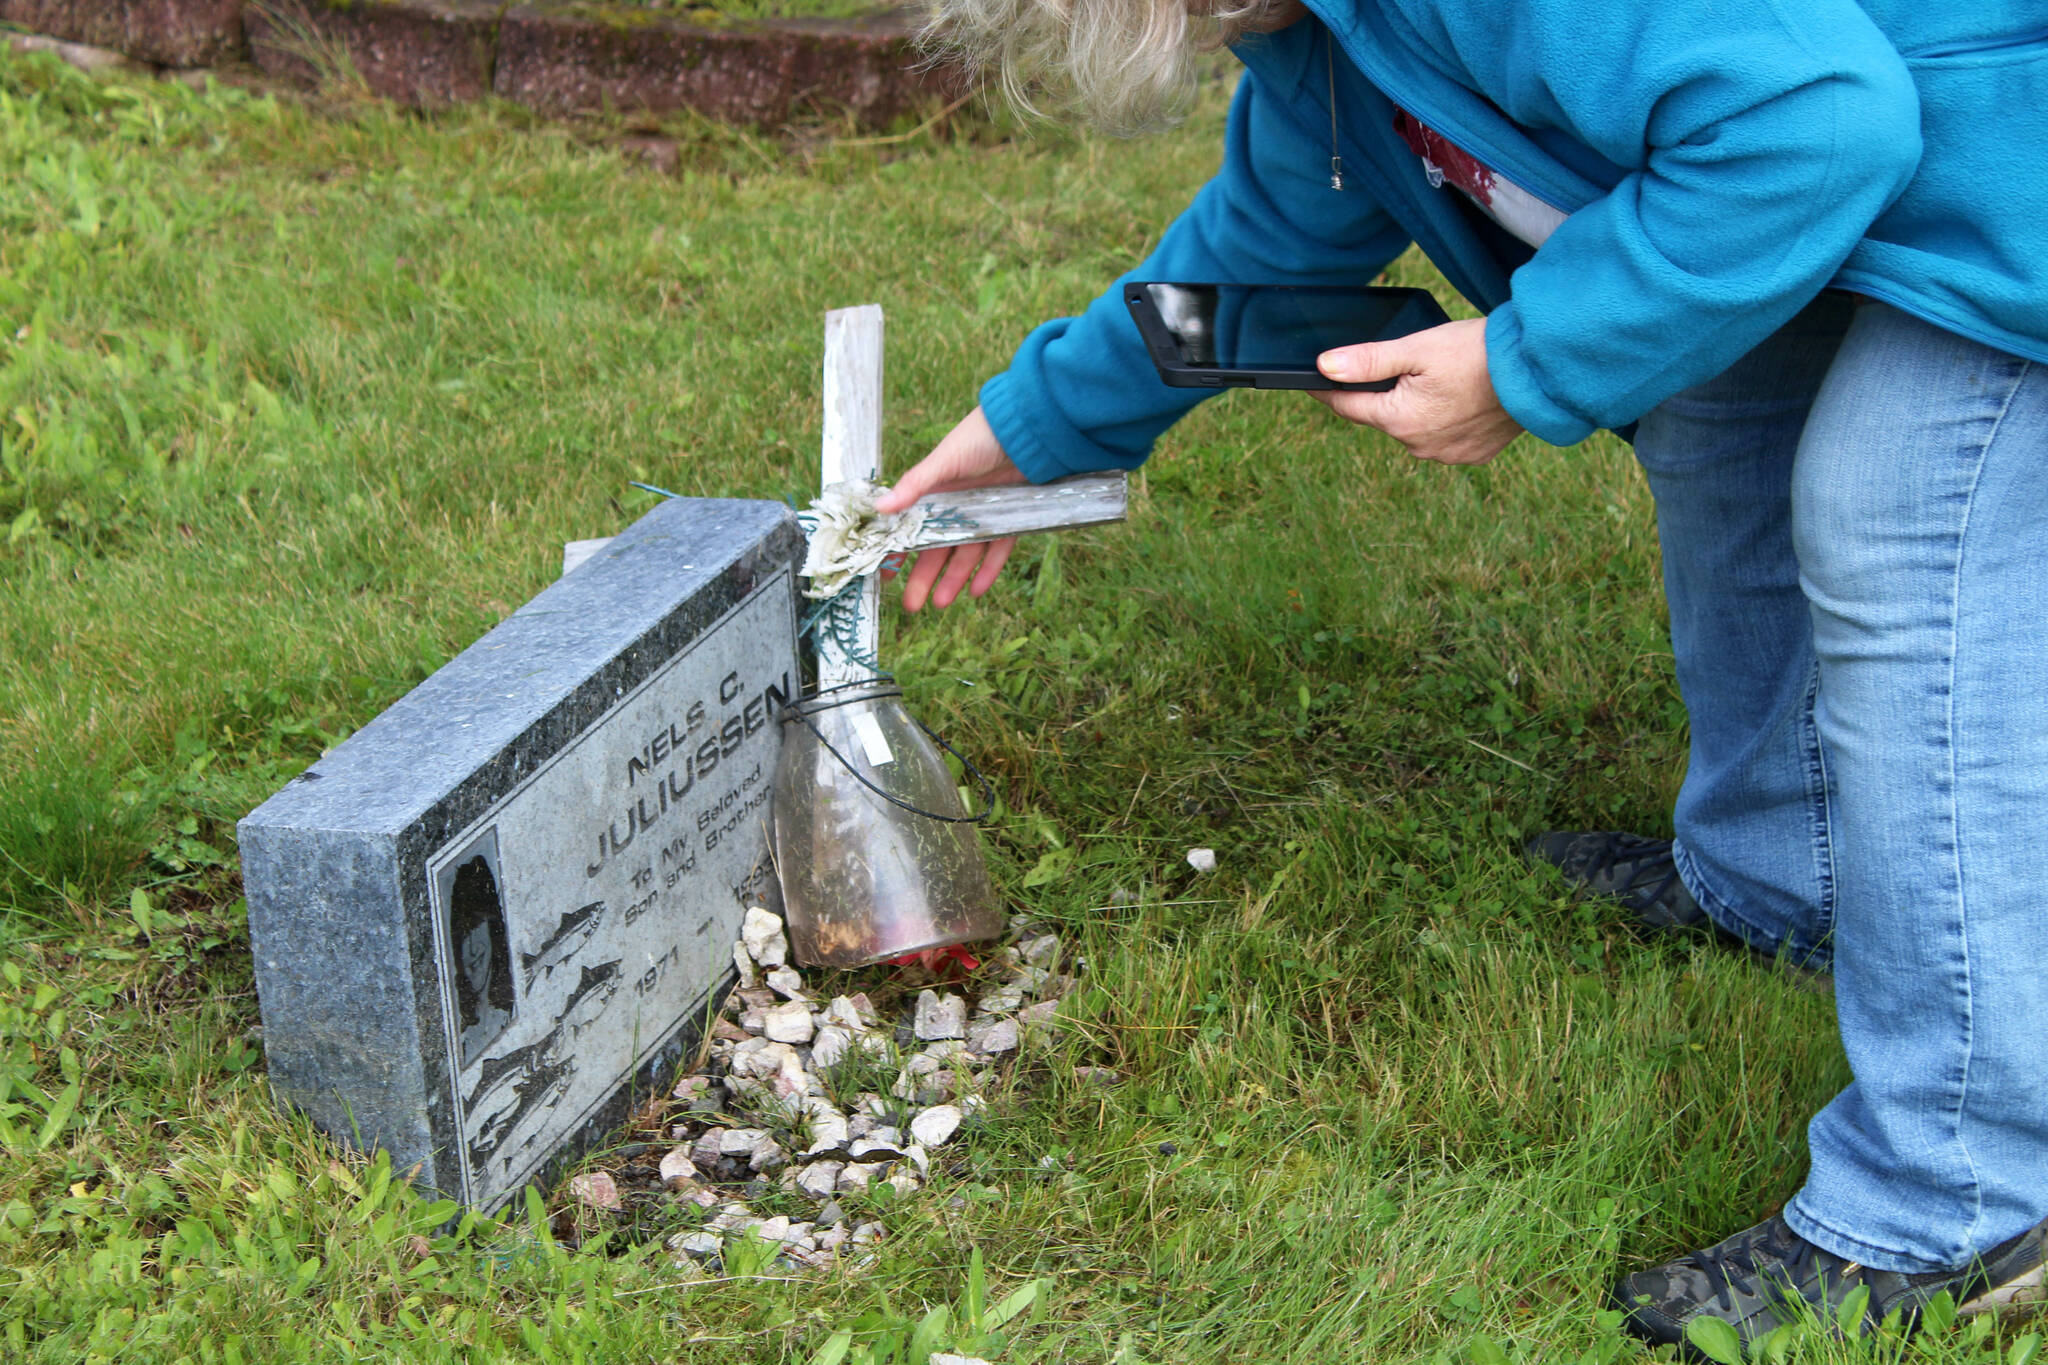 Victoria Askin rights a cross at the headstone of Nels C. Juliussen in the Kenai Cemetery as part of a city imaging project on Friday, Sept. 8, 2023, in Kenai, Alaska. (Ashlyn O’Hara/Peninsula Clarion)